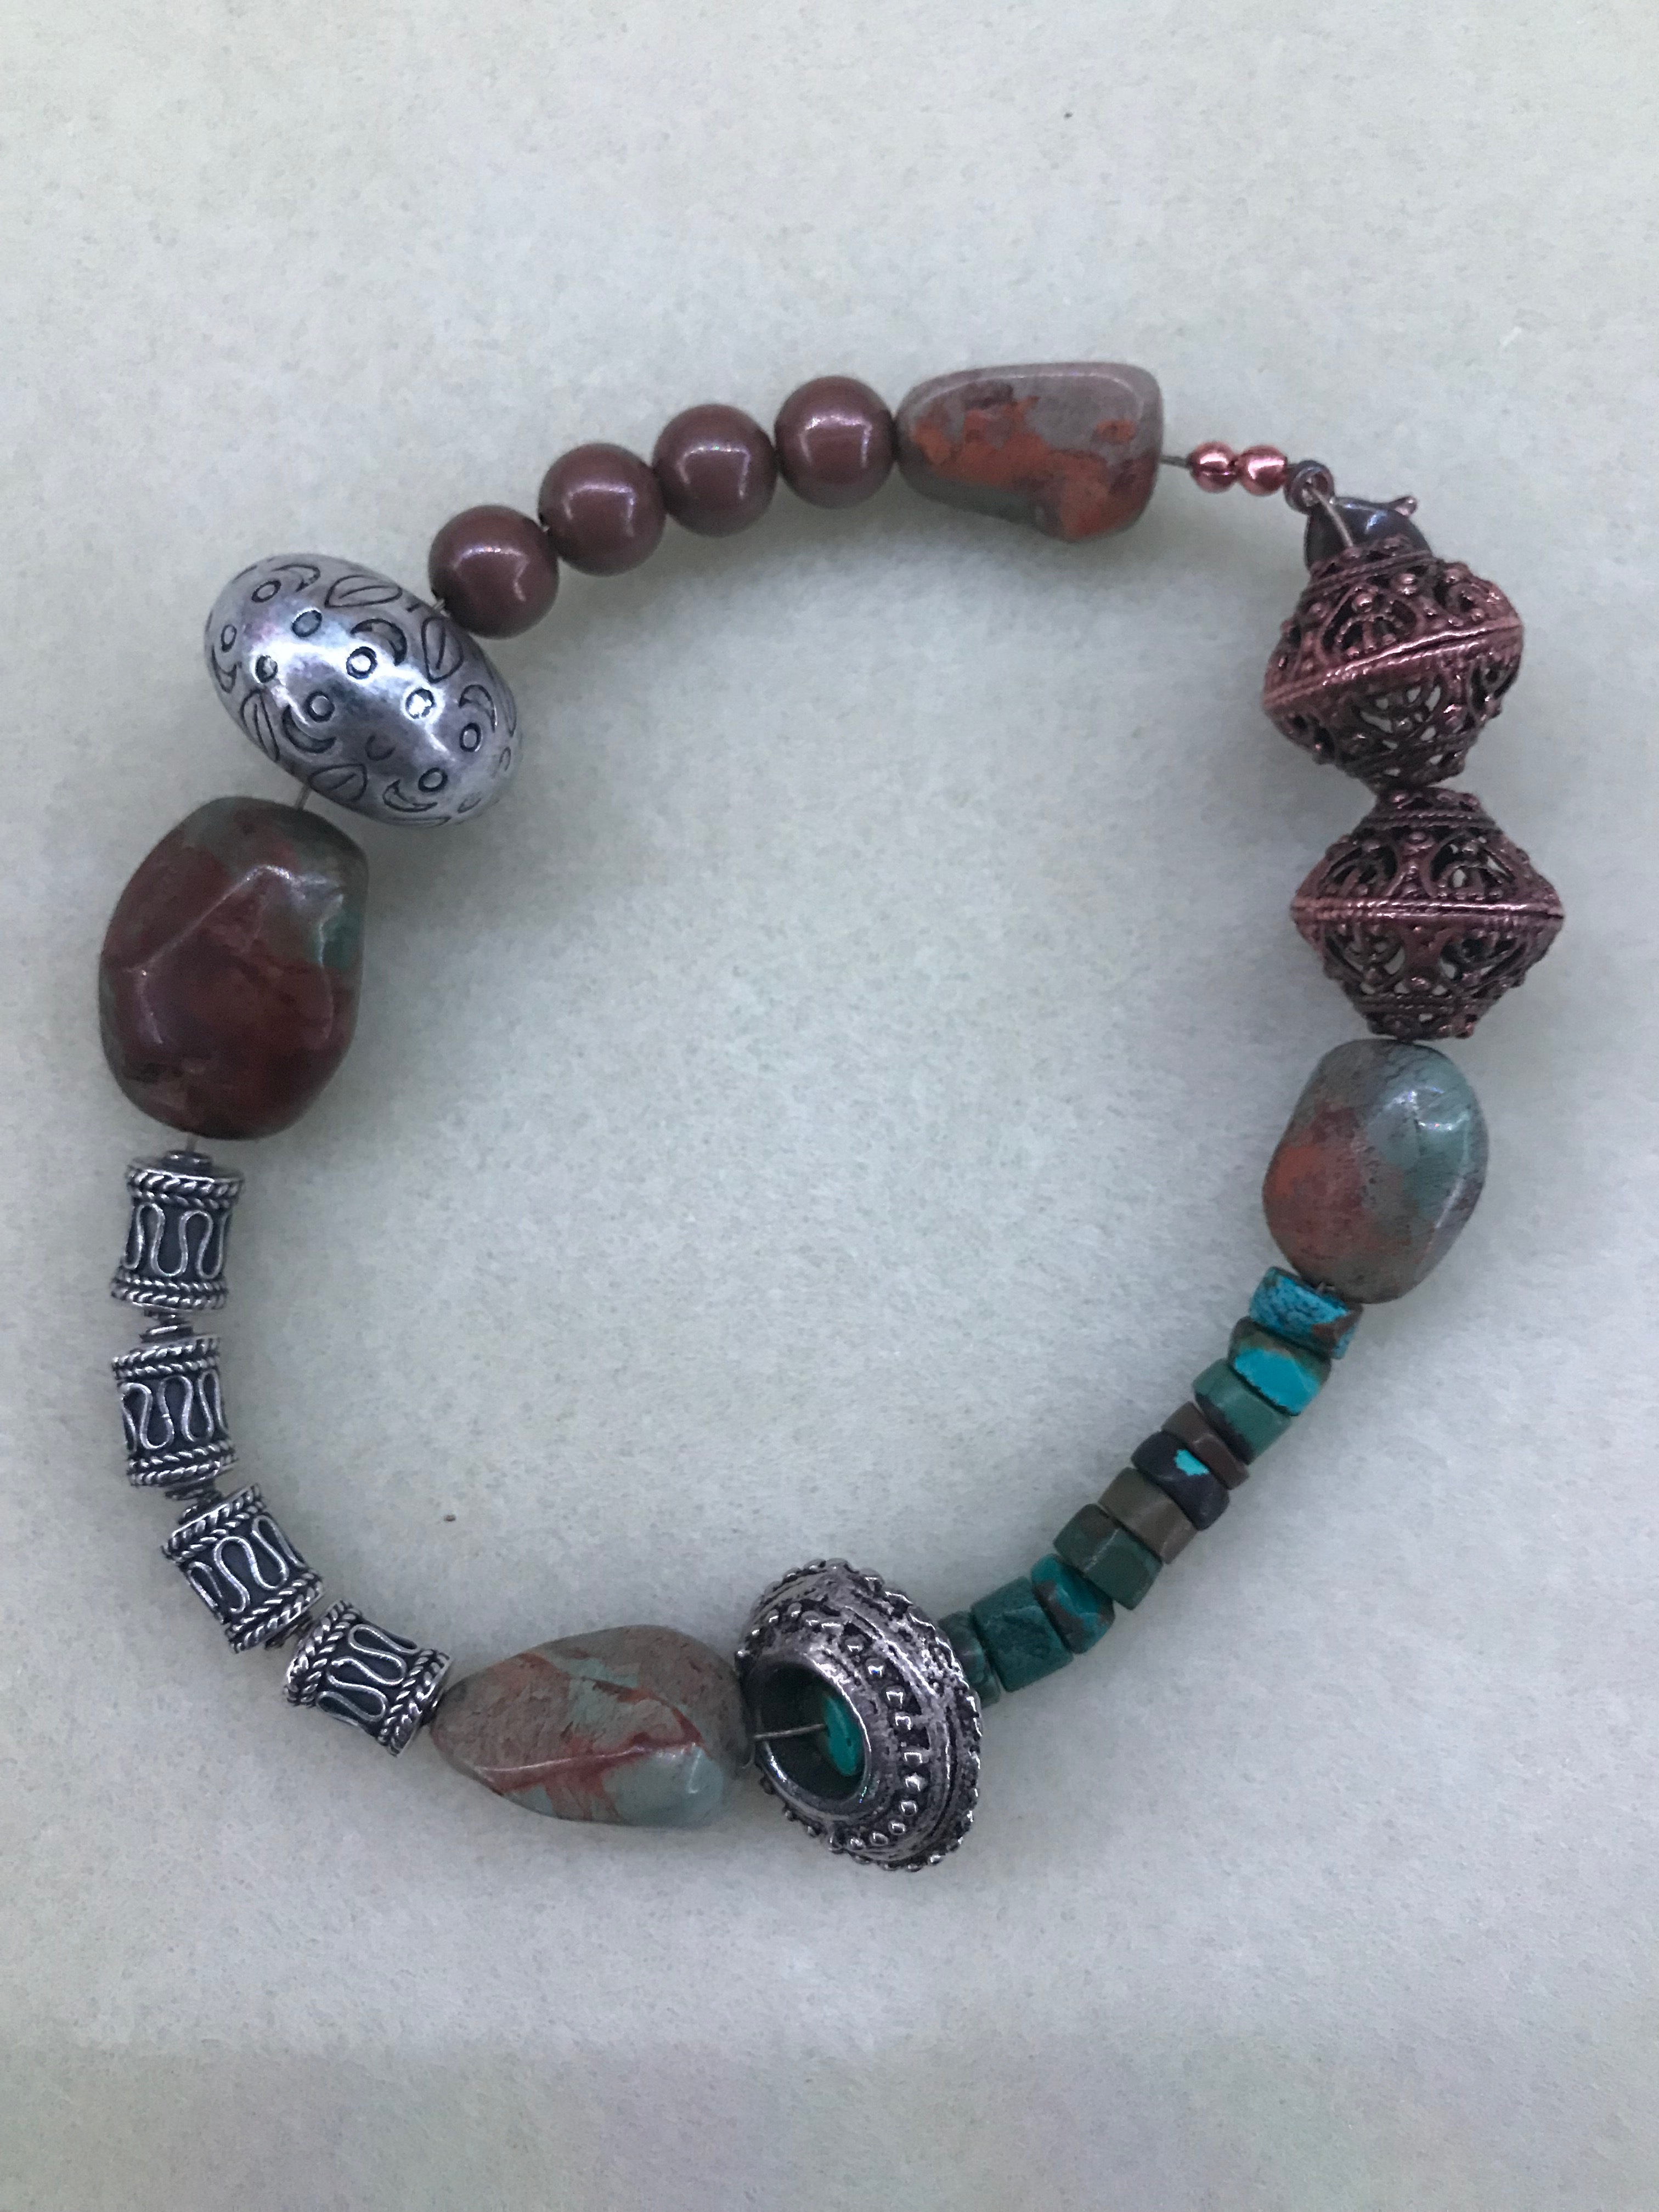 A stim loop made from brass ball bearing beads, turquoise heishi beads, copper basket beads, and irregularl shaped turqiouse beads with one flat side. Medium weight beading wire holds it all together. The loop rests on a white beading mat.